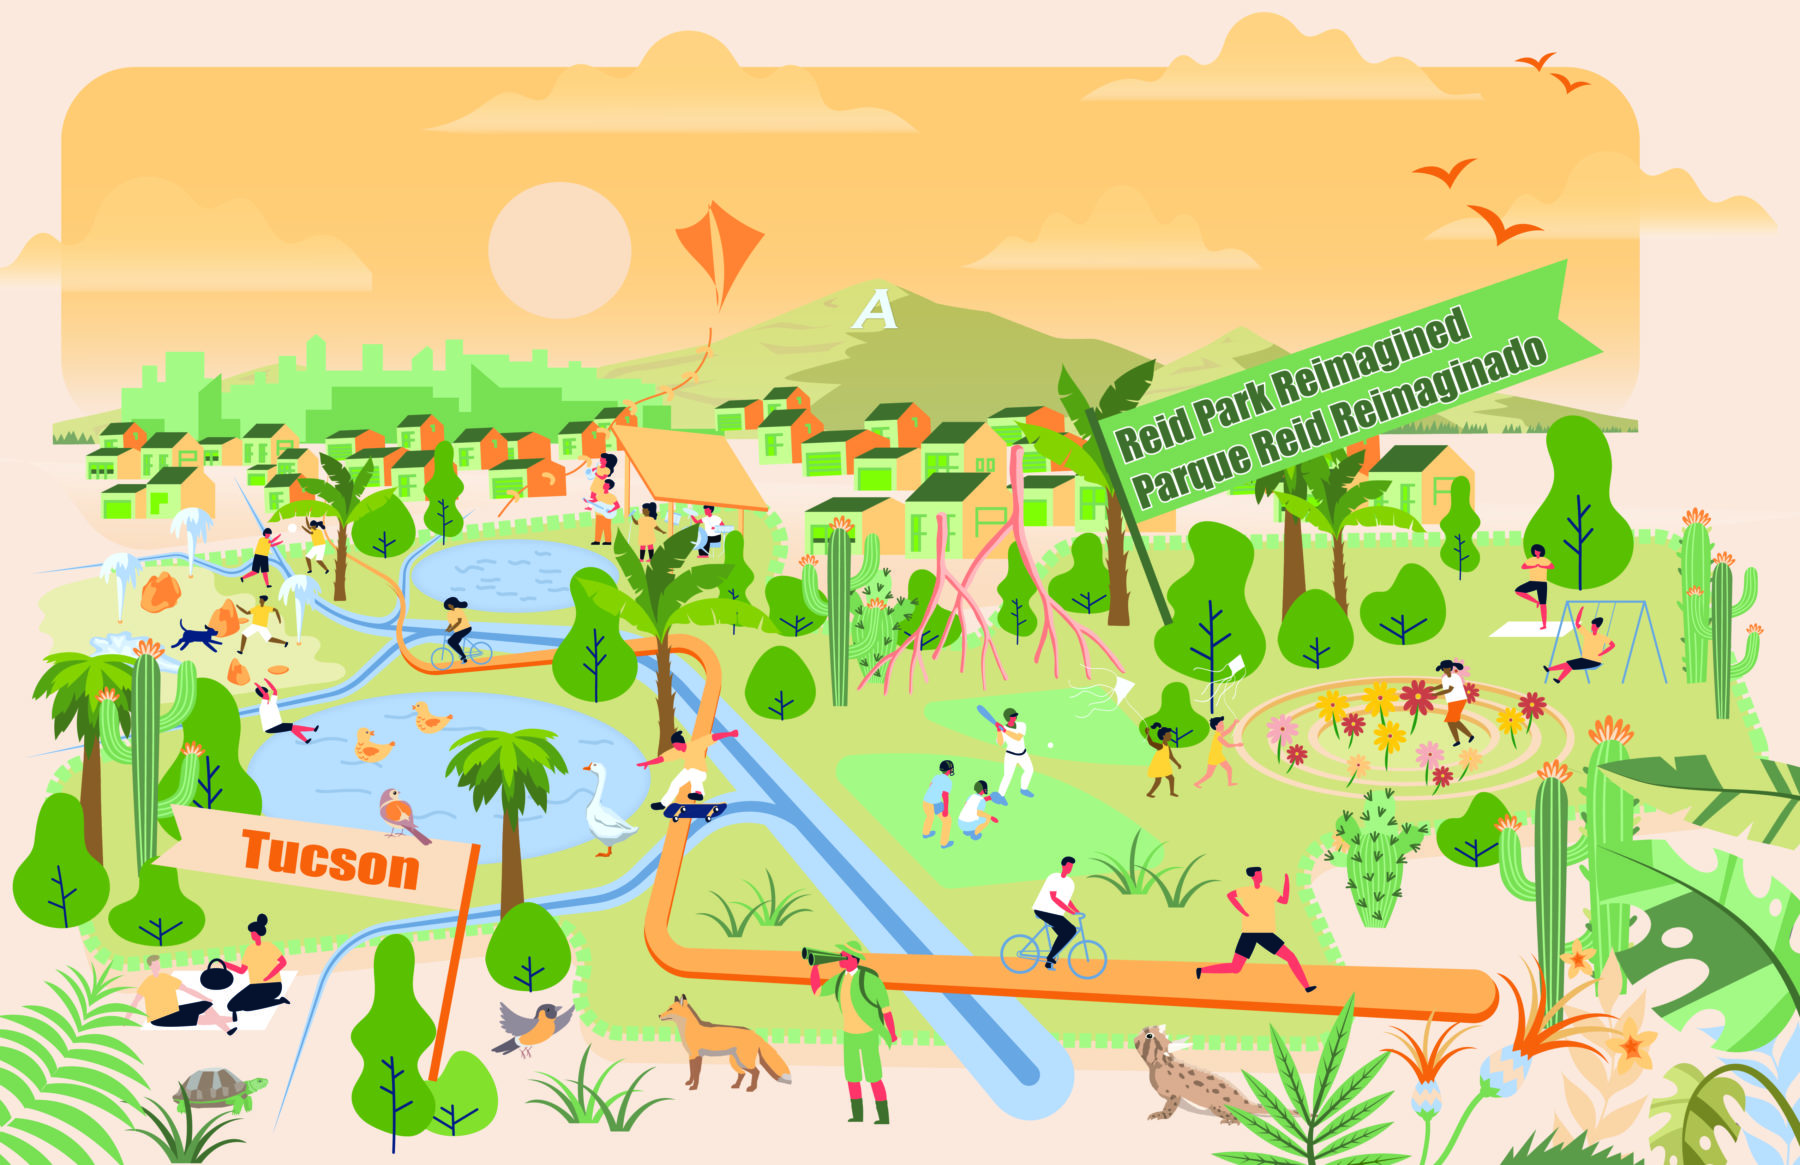 A graphic showing people running, biking, playing baseball, picnicking, and other similar activities in a new park